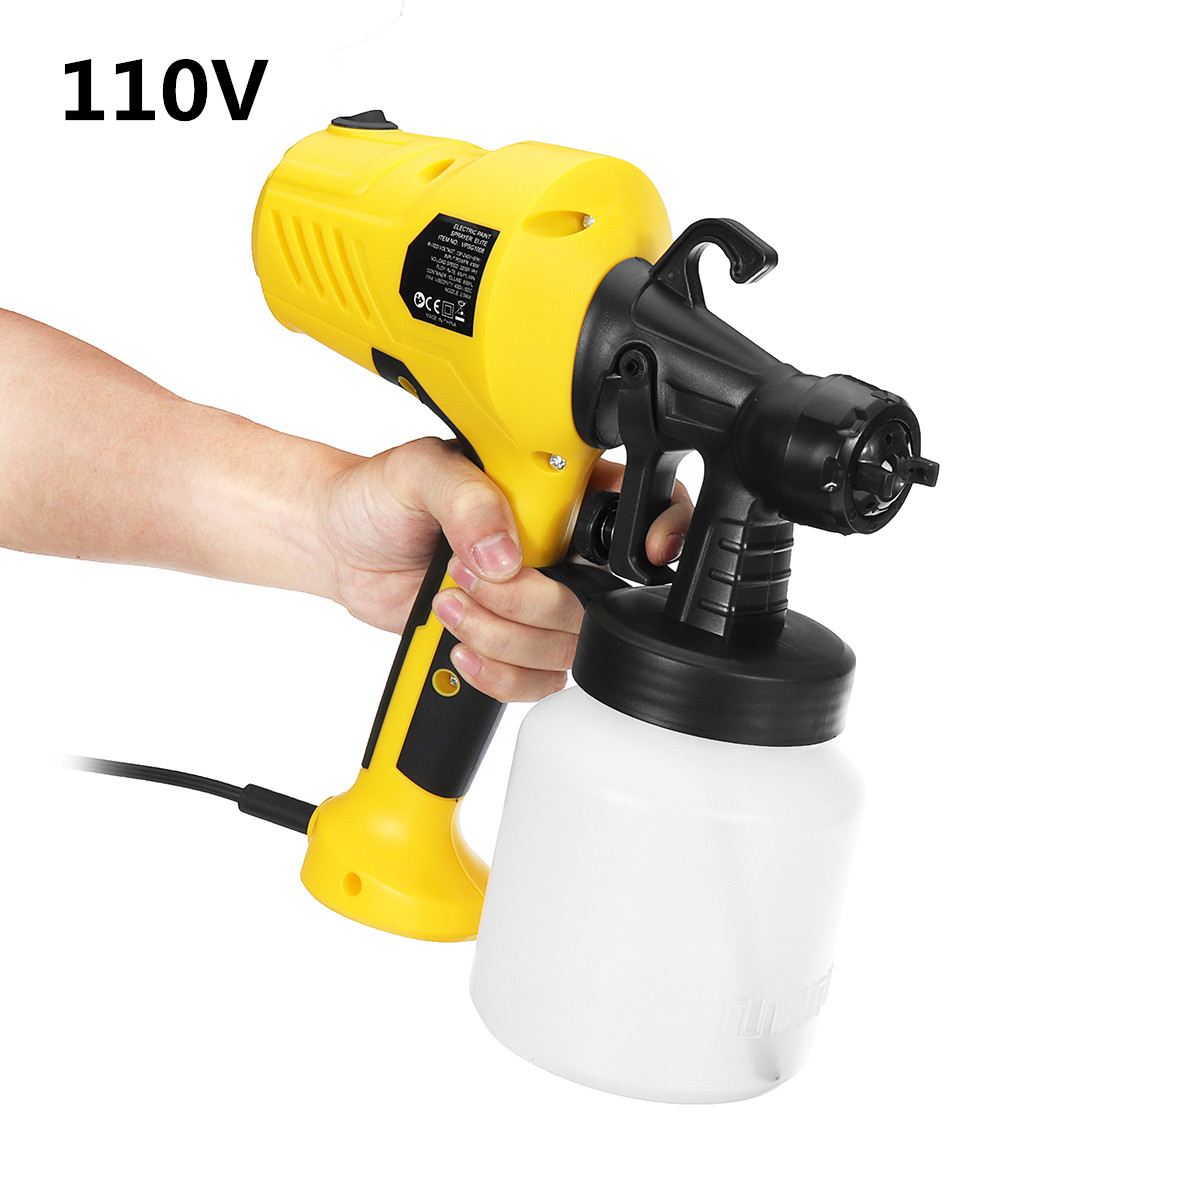 600W Electric Spray Paint Sprayer For Cars Wood Furniture Wall Woodworking 23